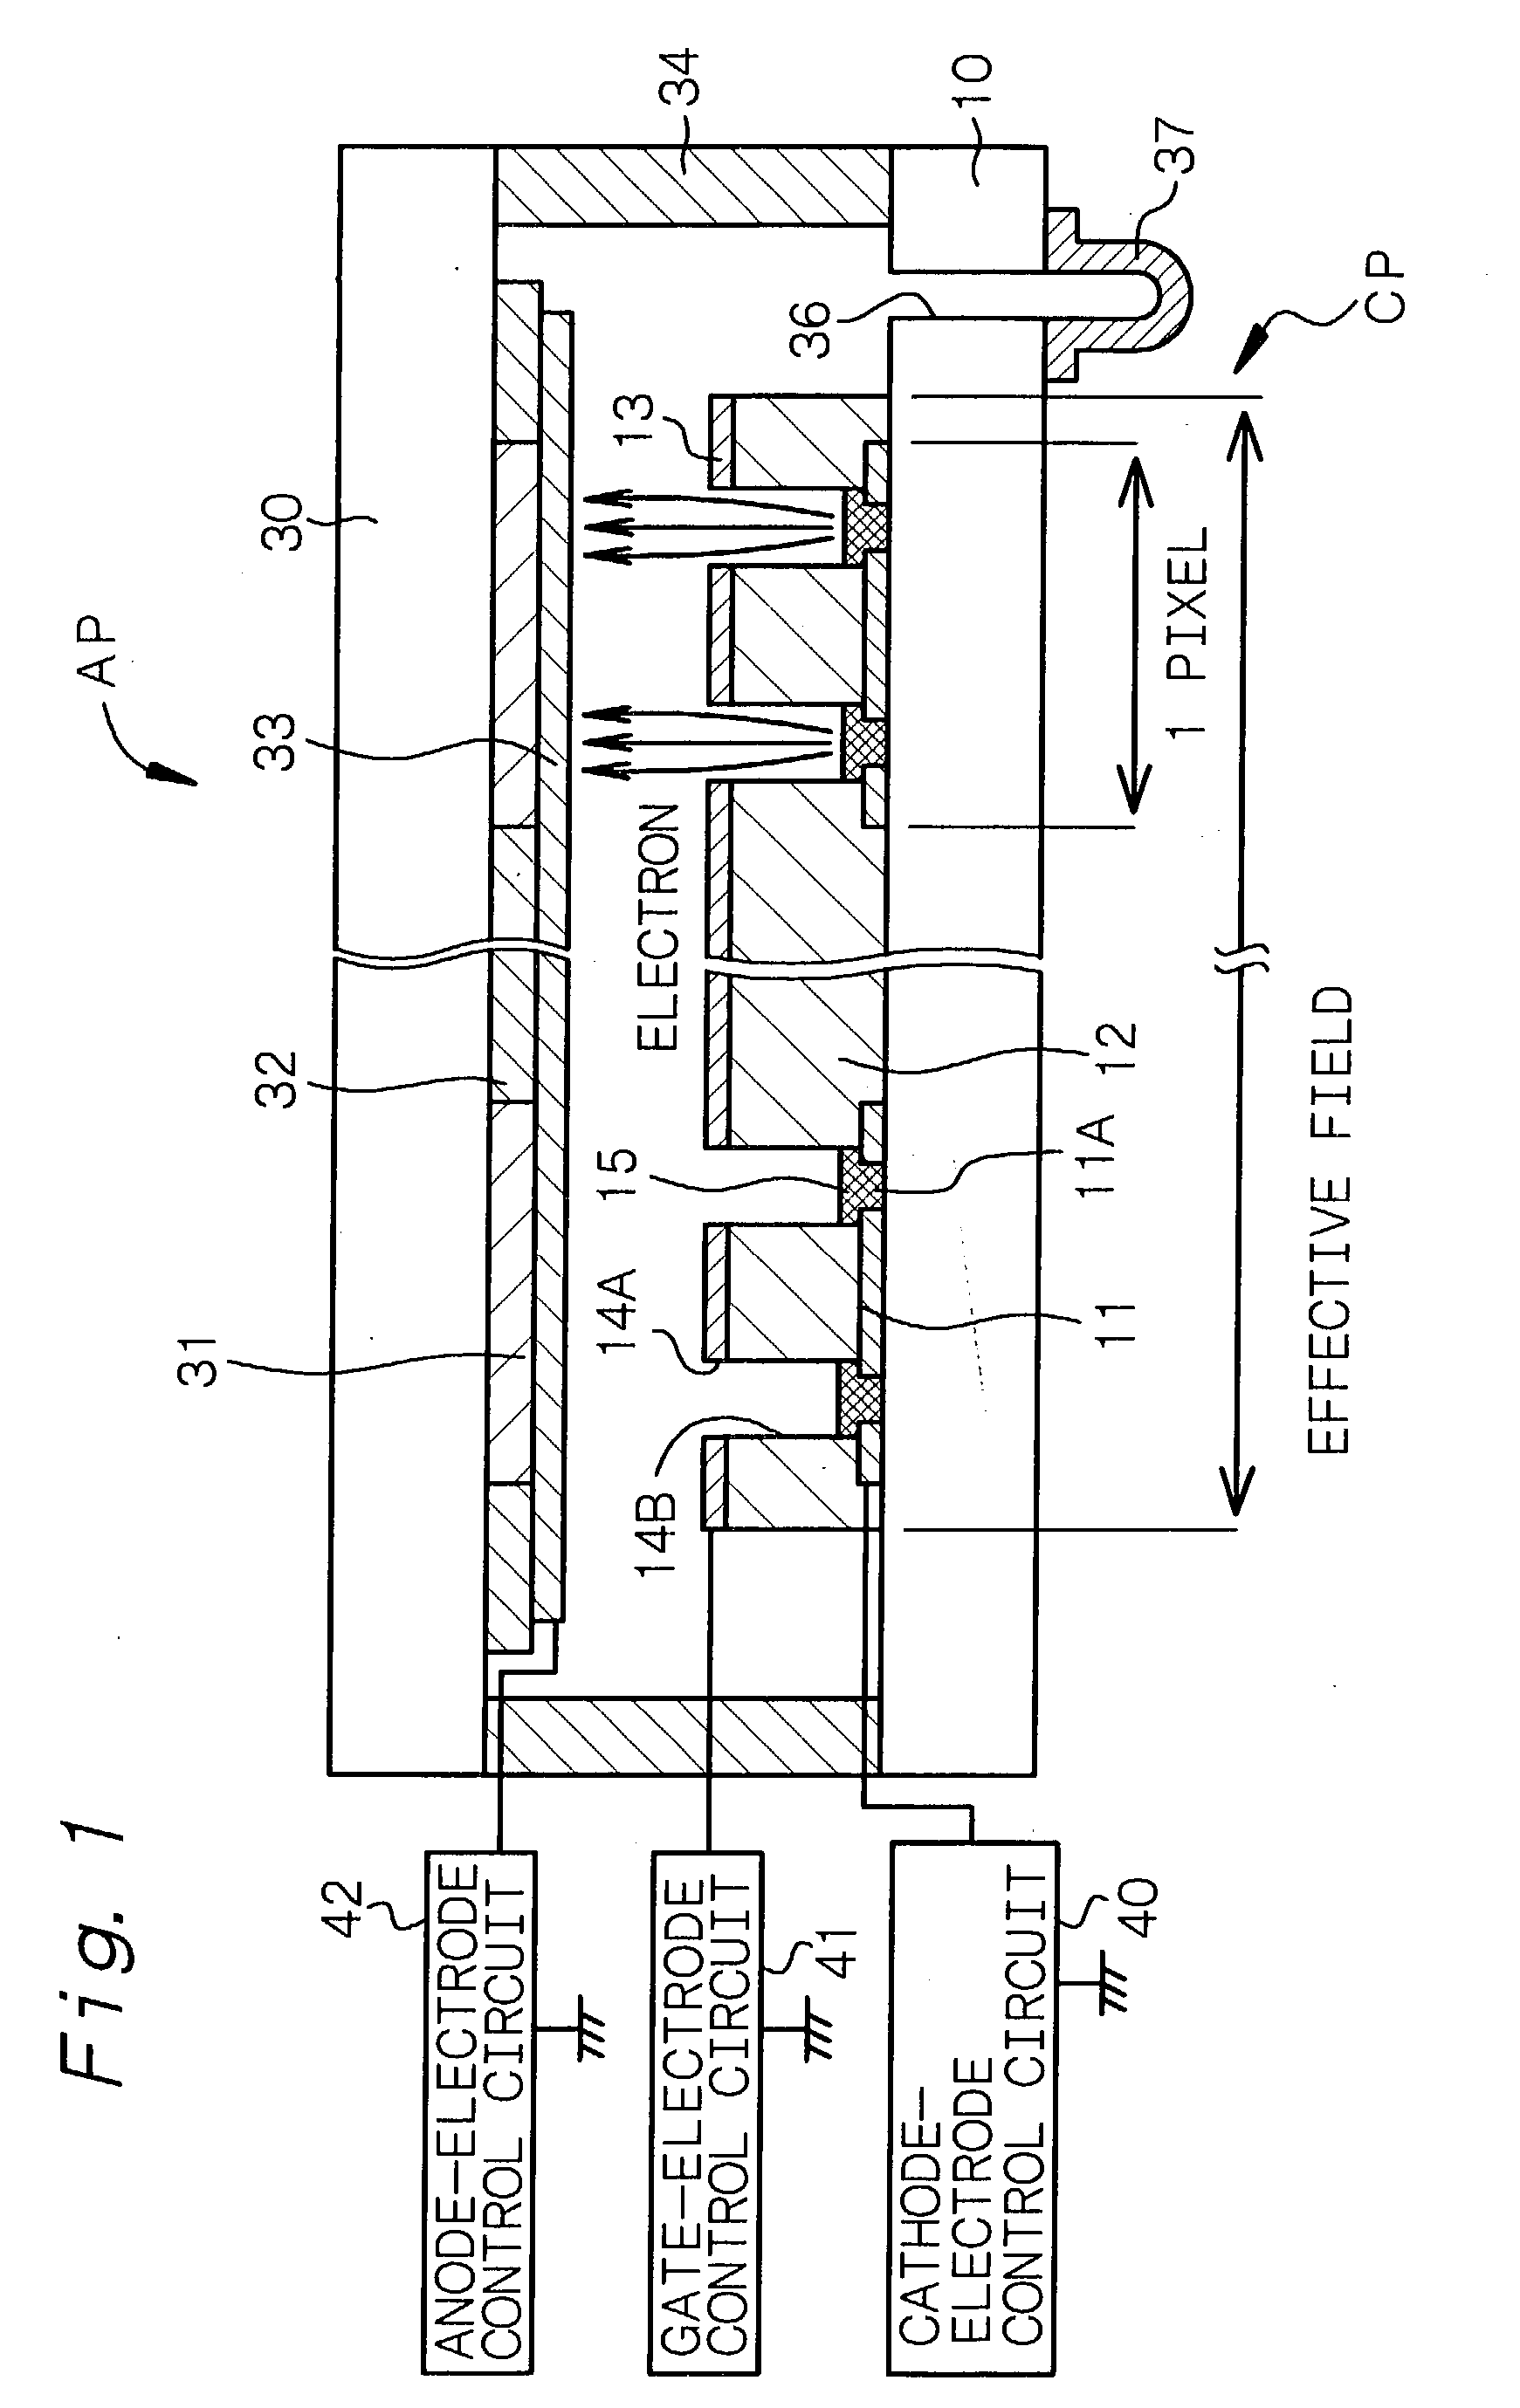 Cold cathode field emission device and process for the production thereof, and cold cathode field emission display and process for the production thereof